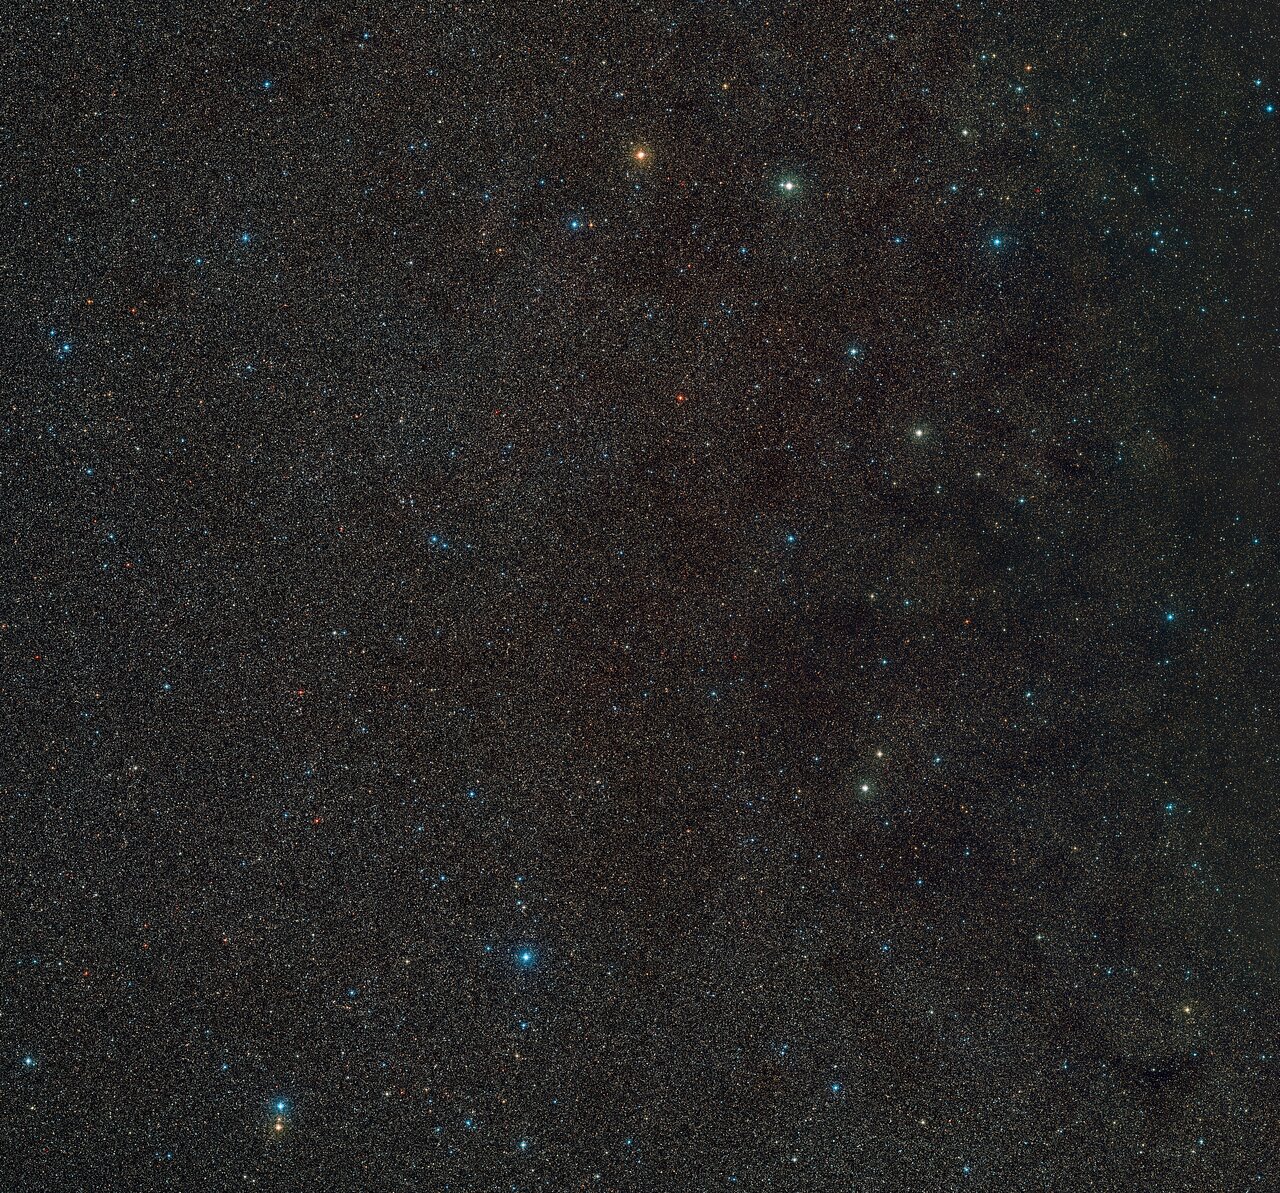 An image of a patch of space containing hundreds of distant stars